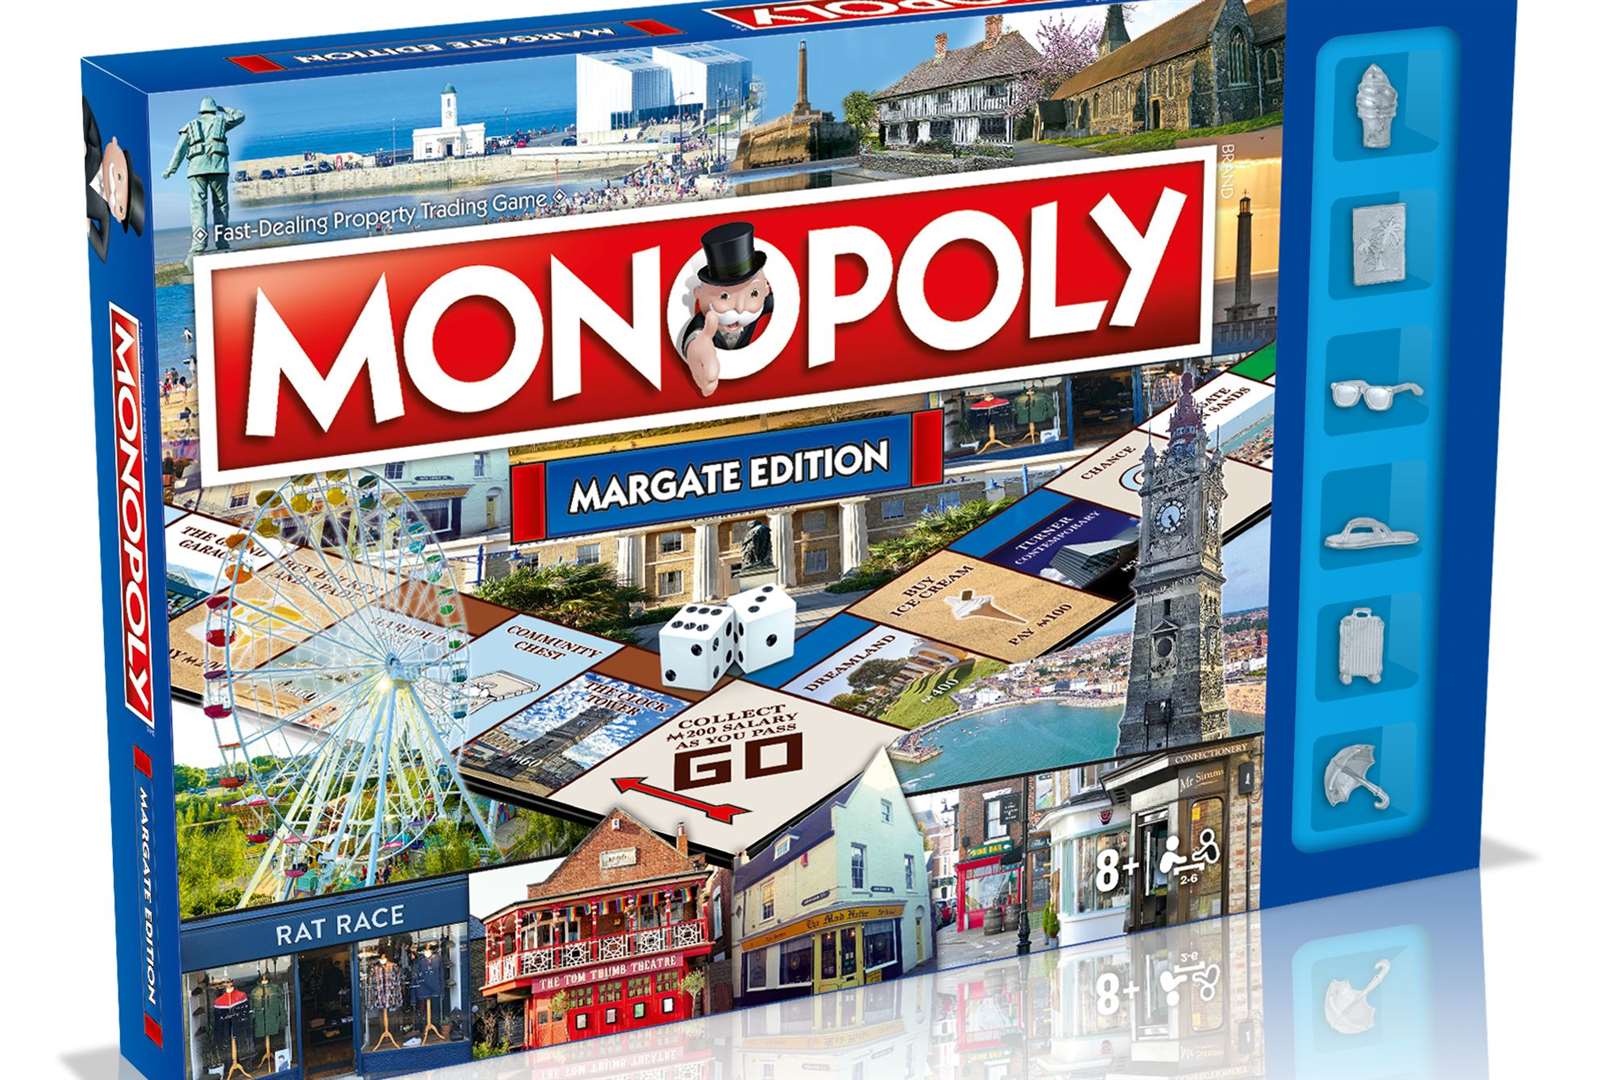 Margate's edition of the Monopoly game